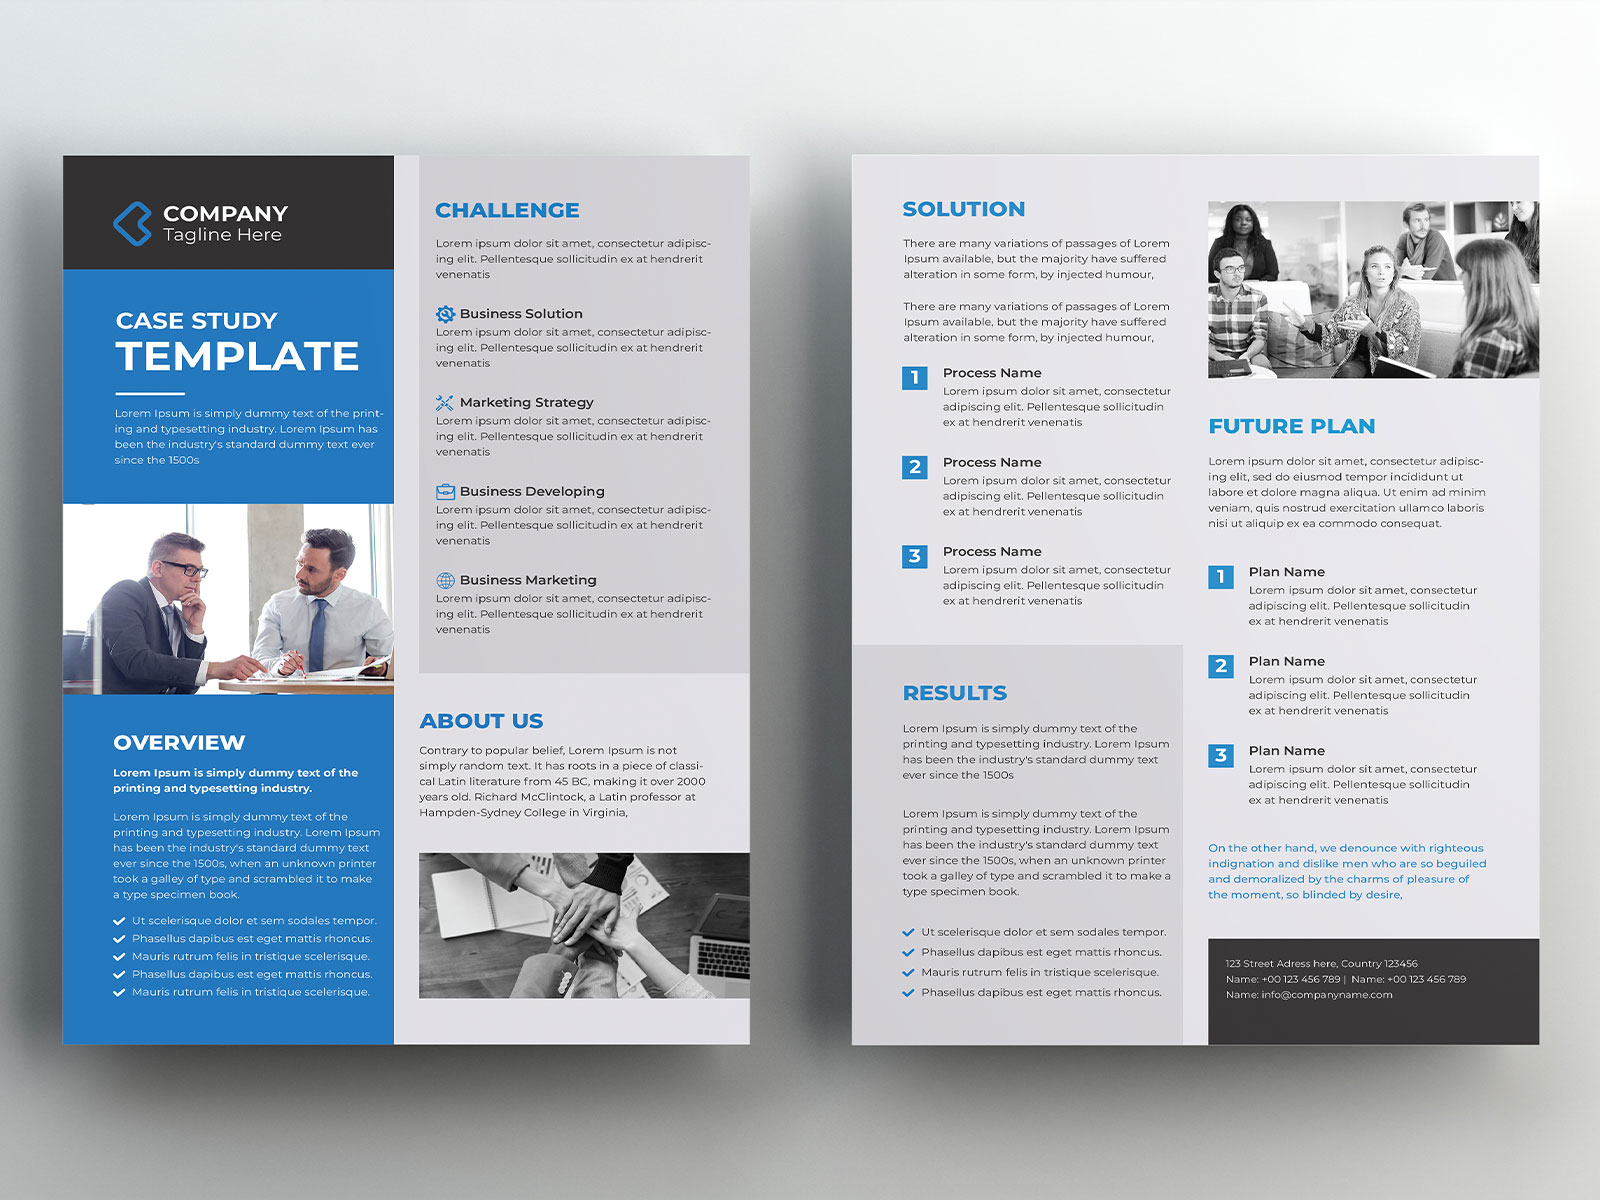 Case Study Template by Shah jahan on Dribbble